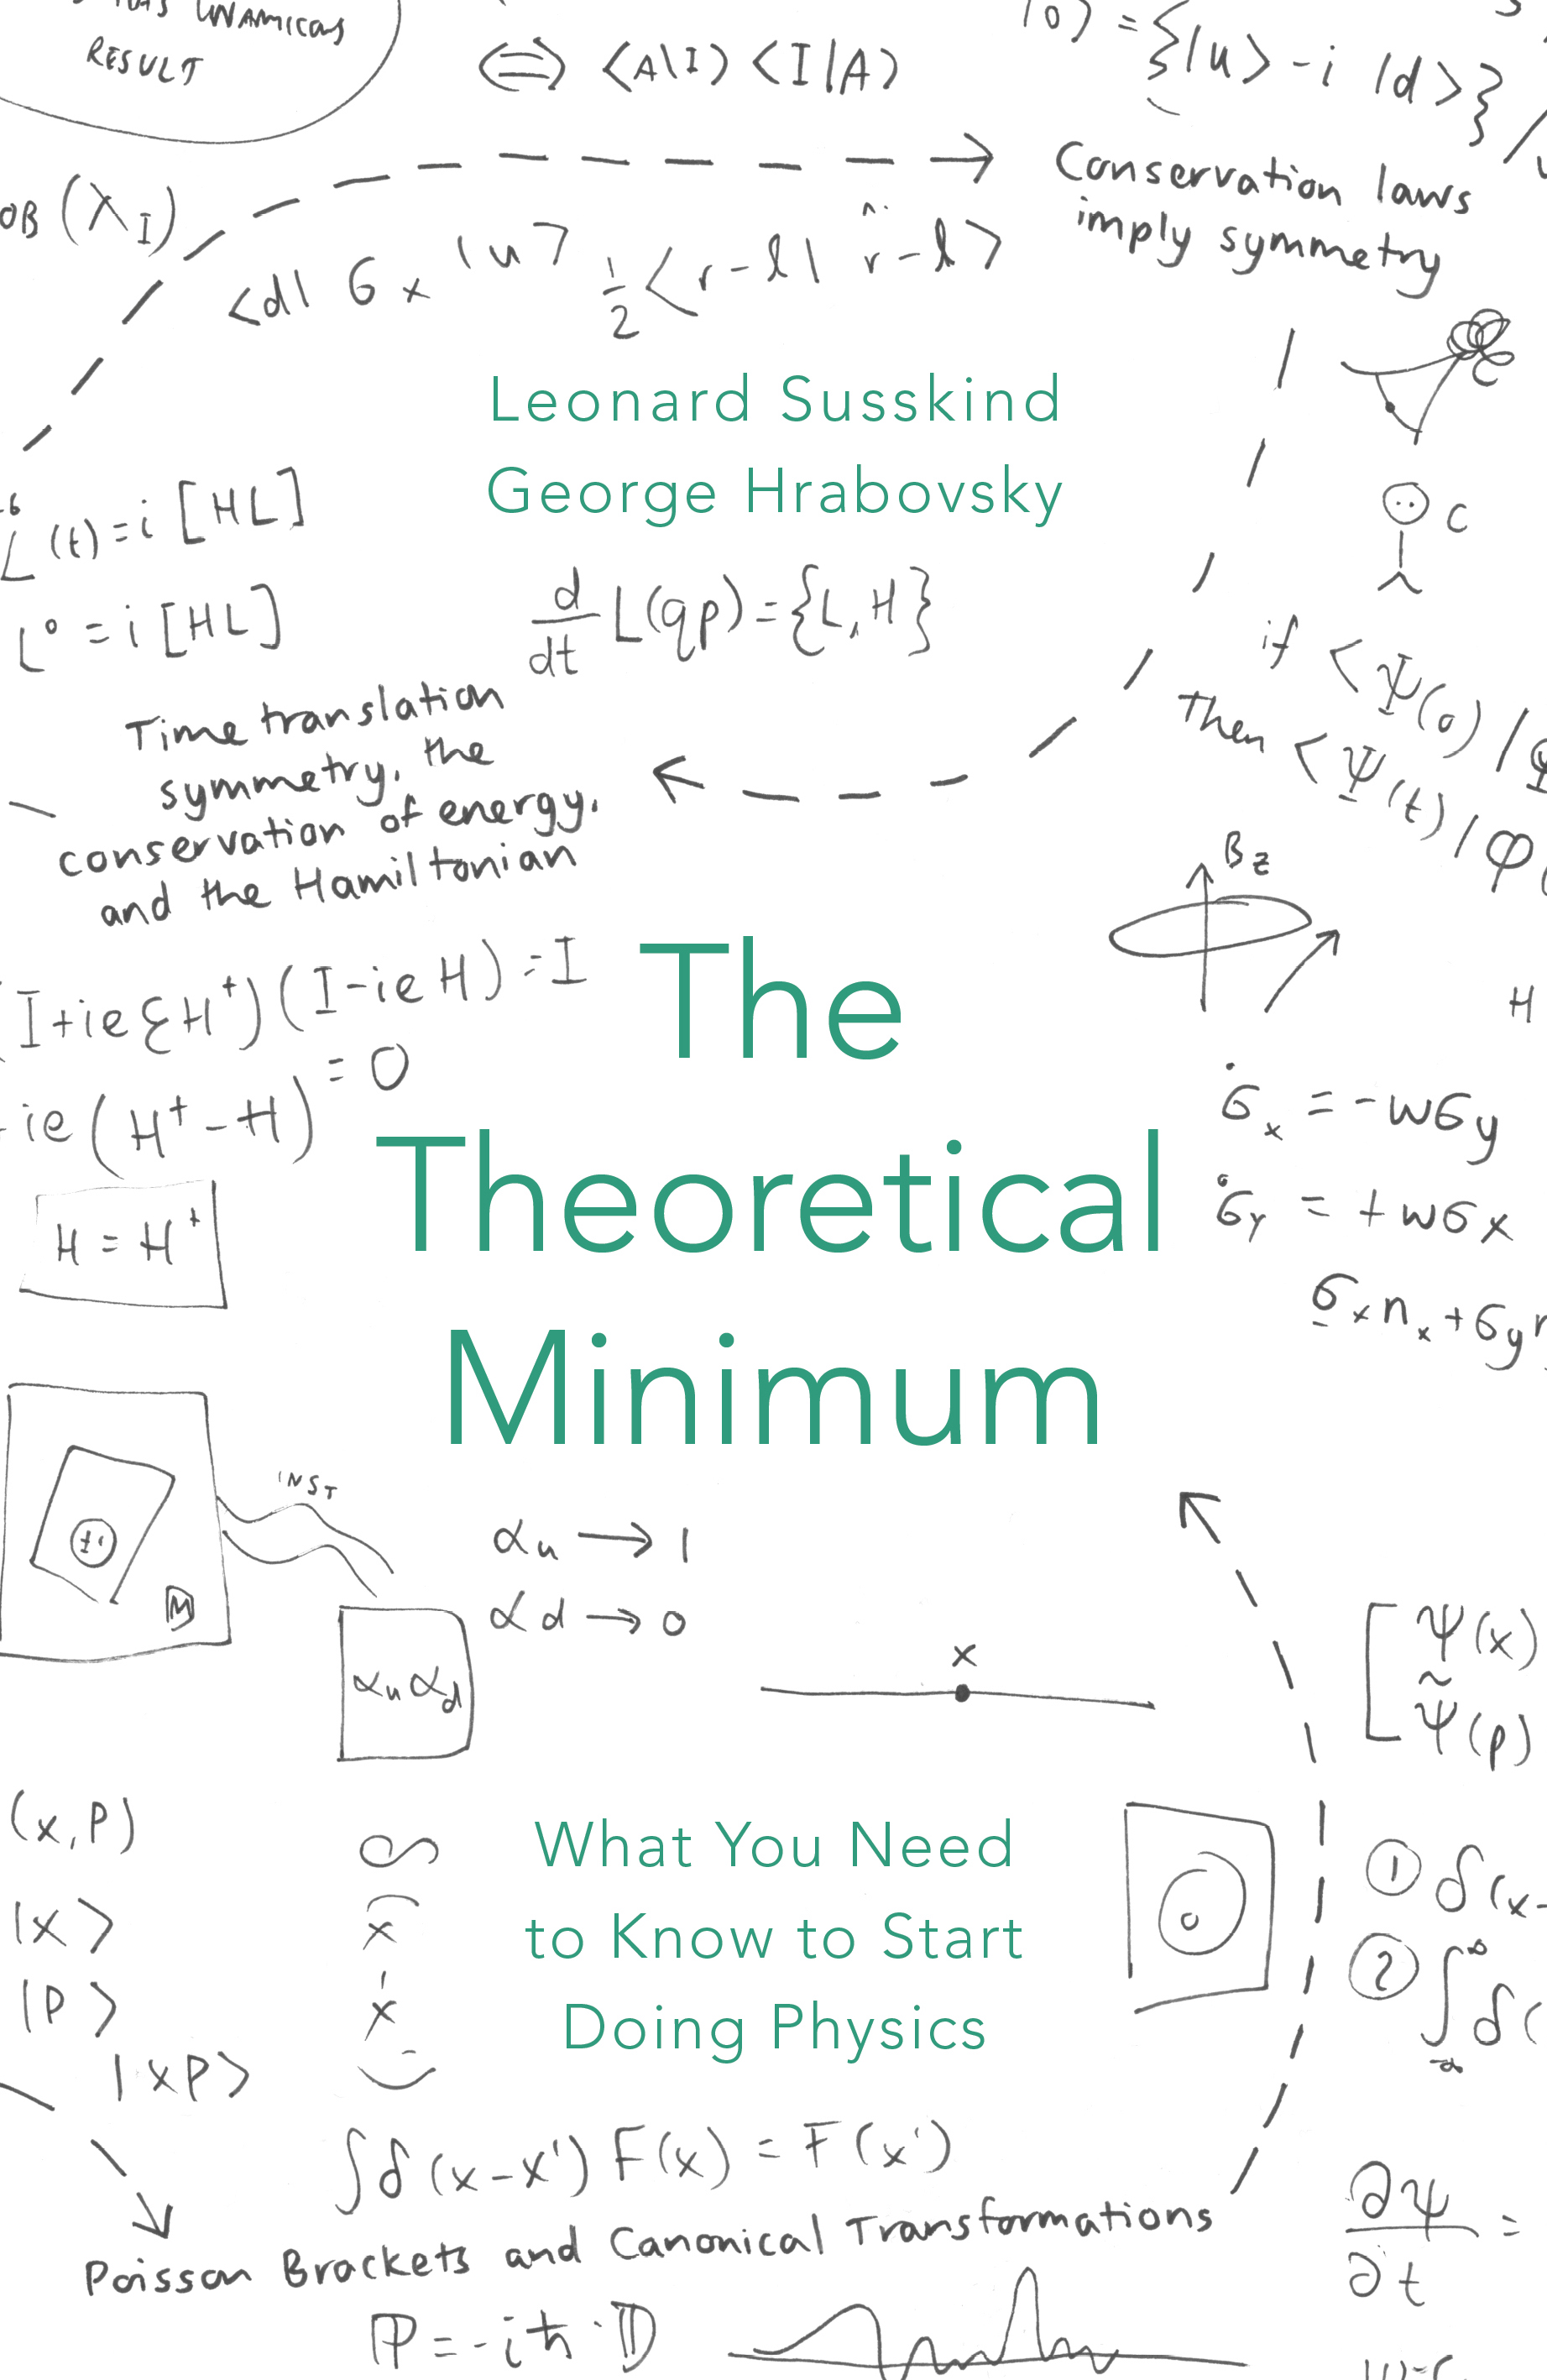 Here is the cover of the Penguin Press version of The Theoretical Minimum.